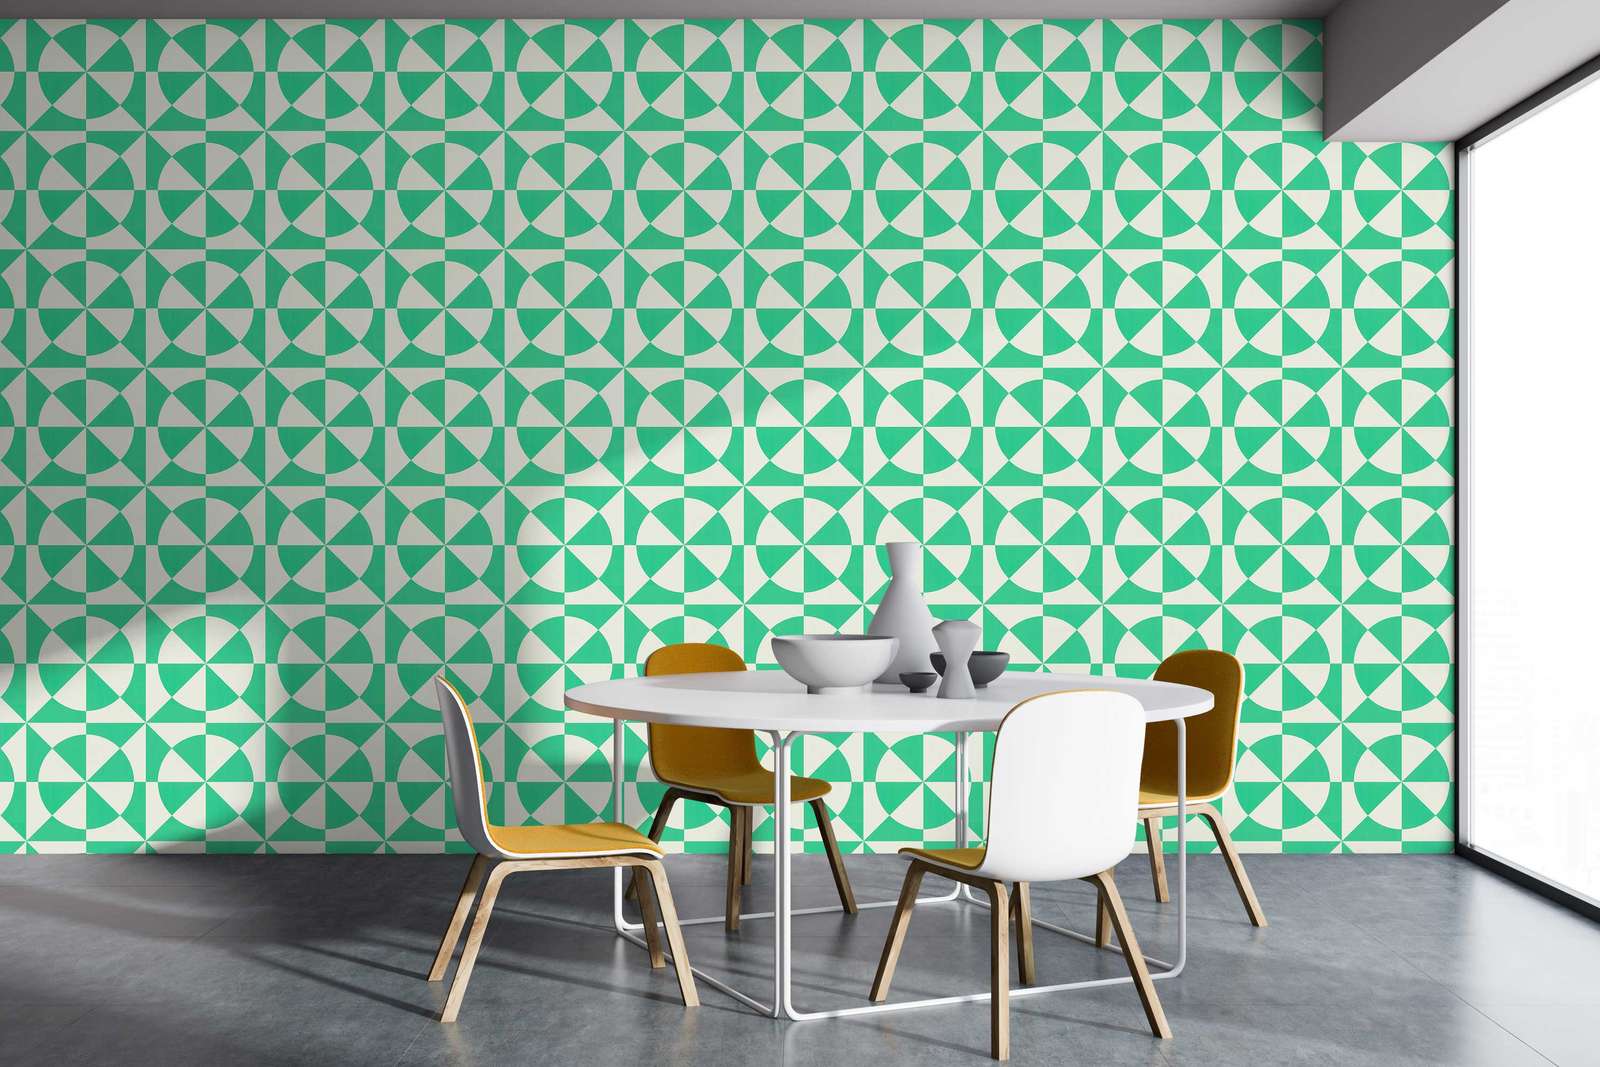             Non-woven wallpaper with geometric shapes - green, white
        